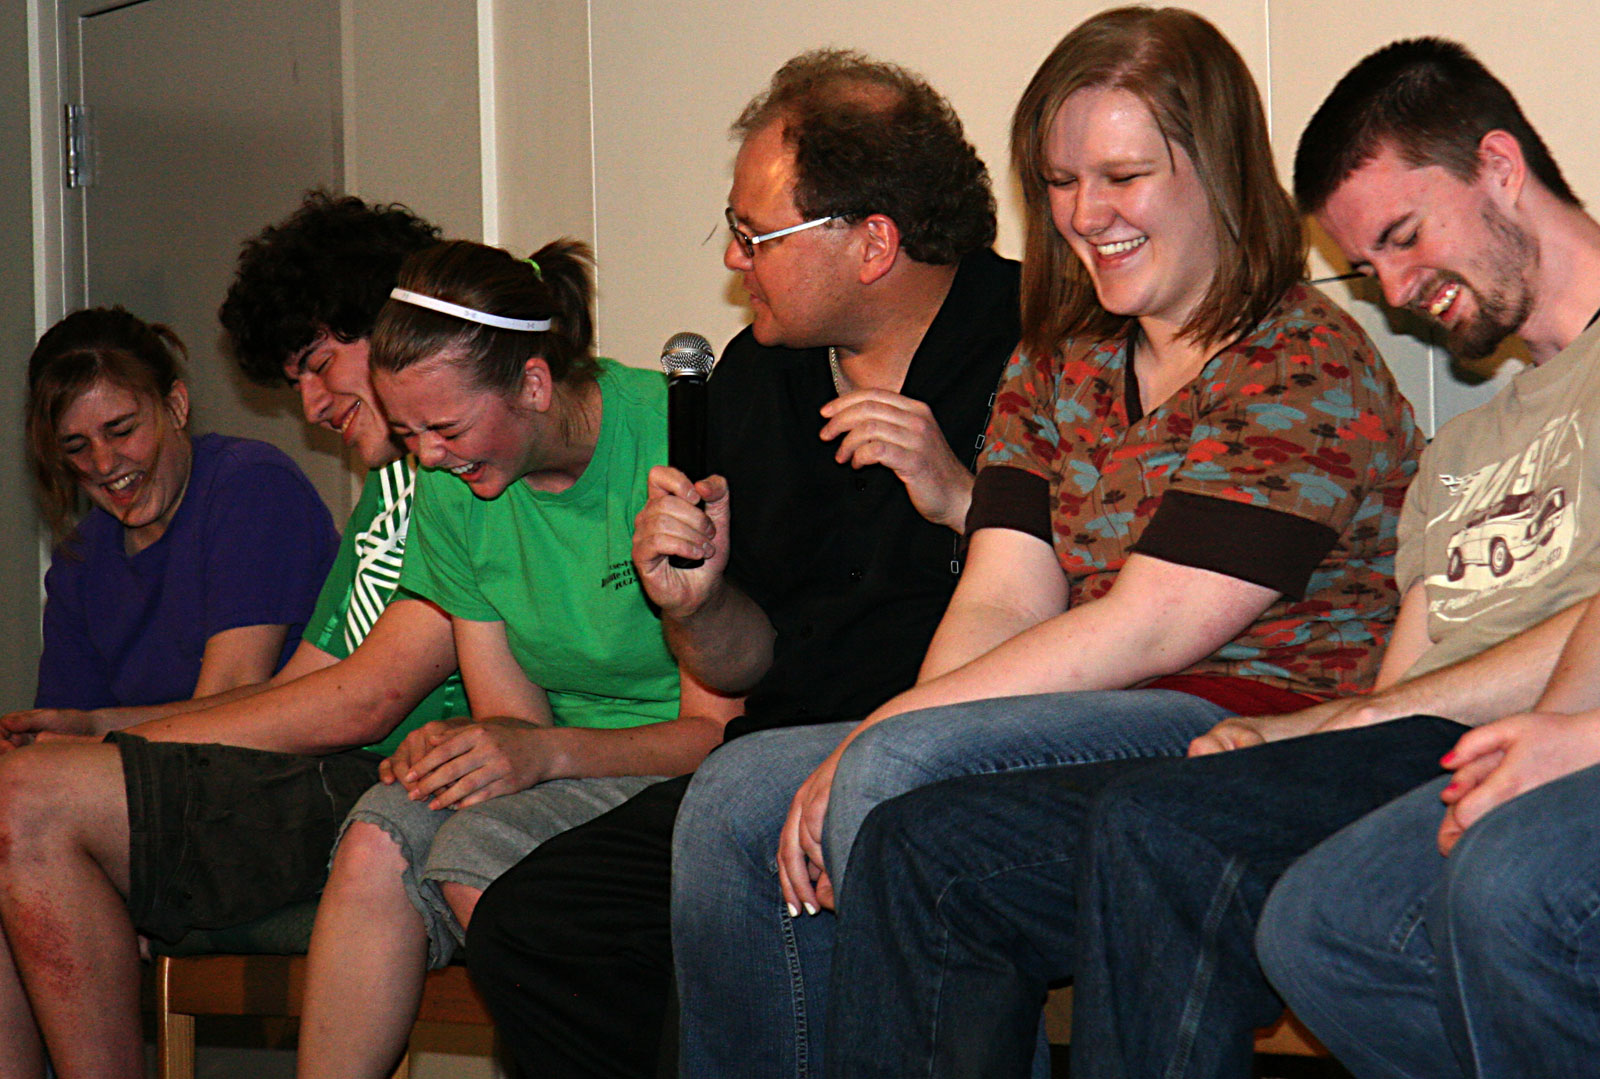 hypnotist chris cady with hypnotized college students laughing on stage in hypnotism show